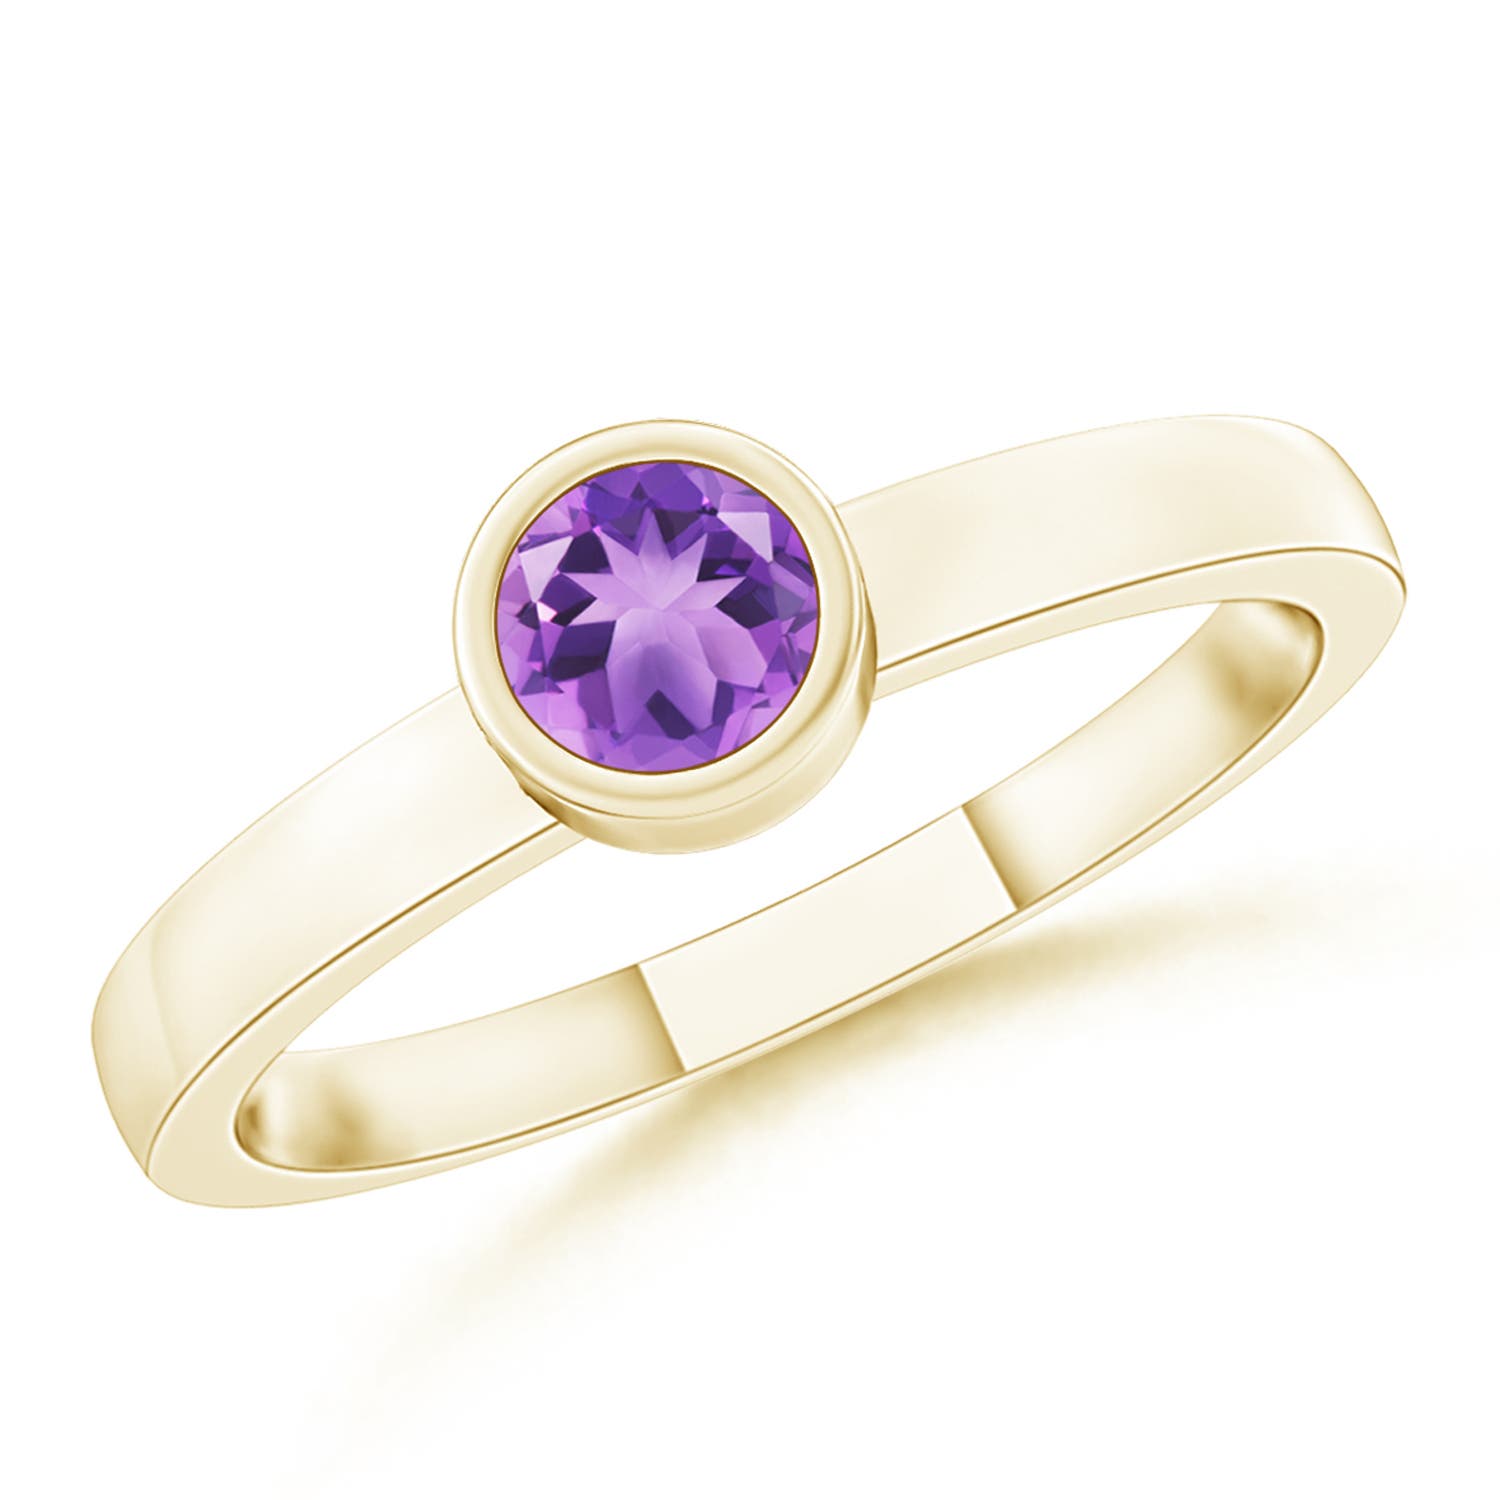 A - Amethyst / 0.16 CT / 14 KT Yellow Gold